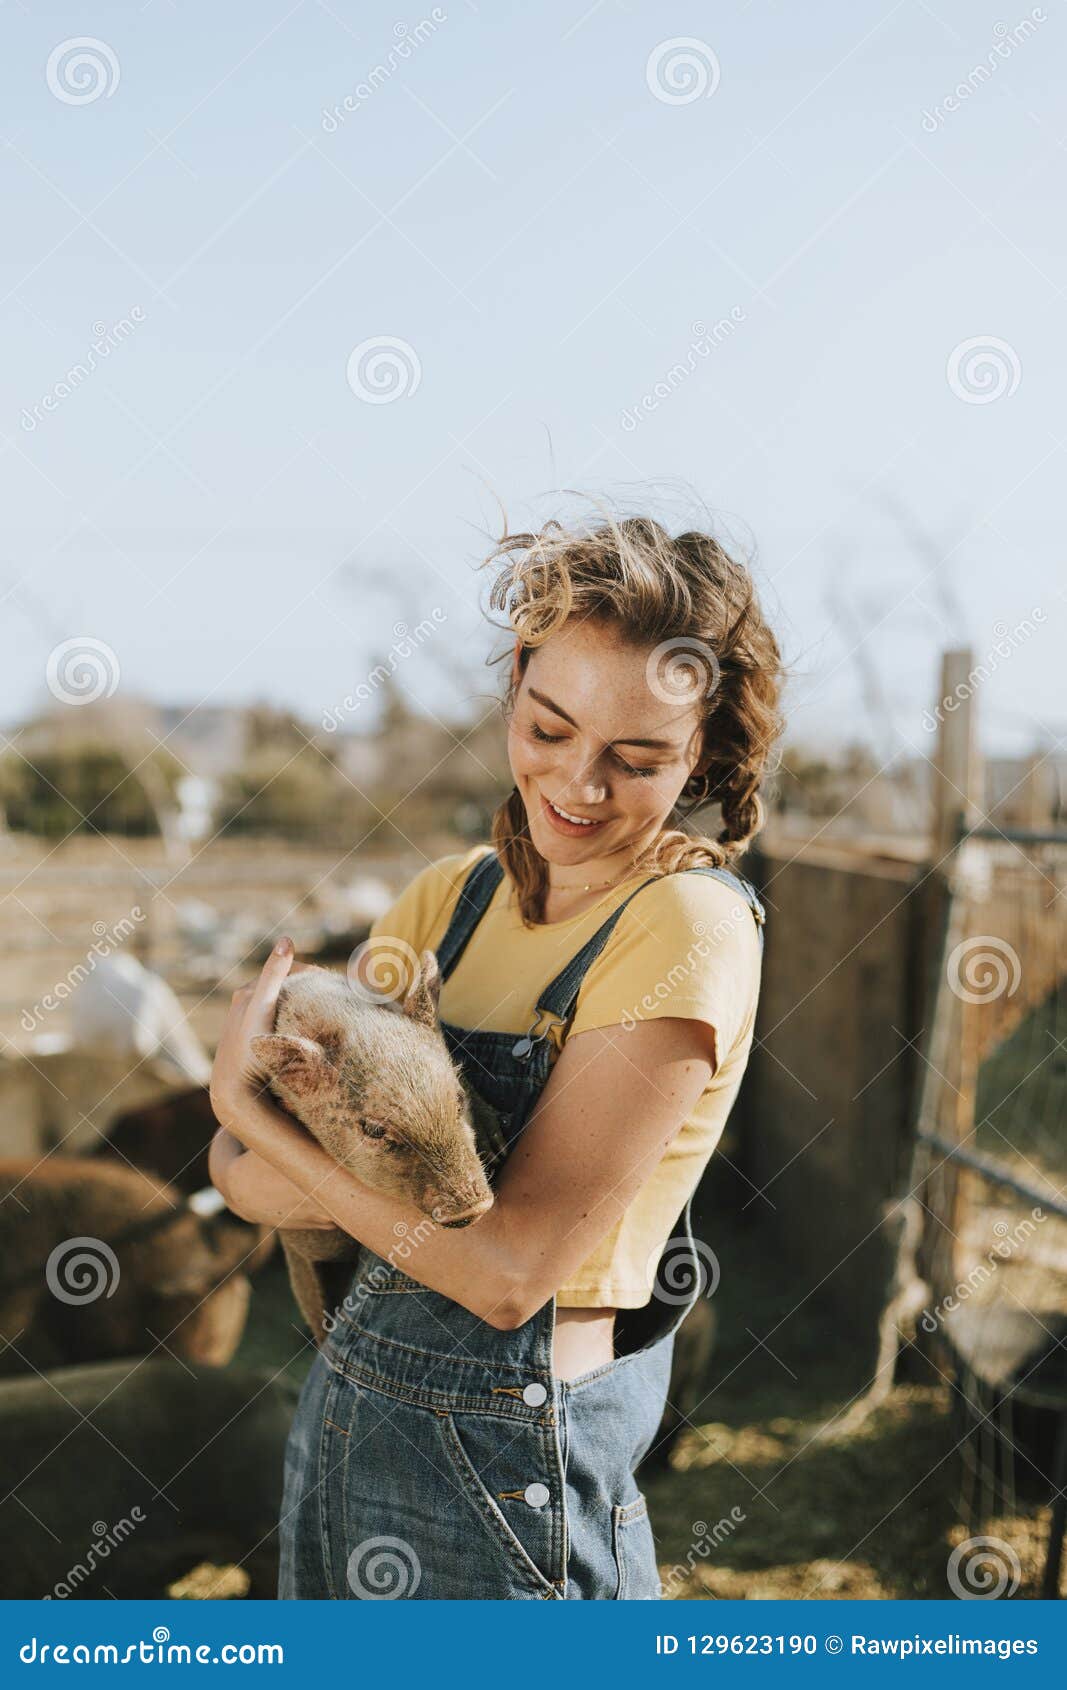 young volunteer with a piglet, the sanctuary at soledad, mojave